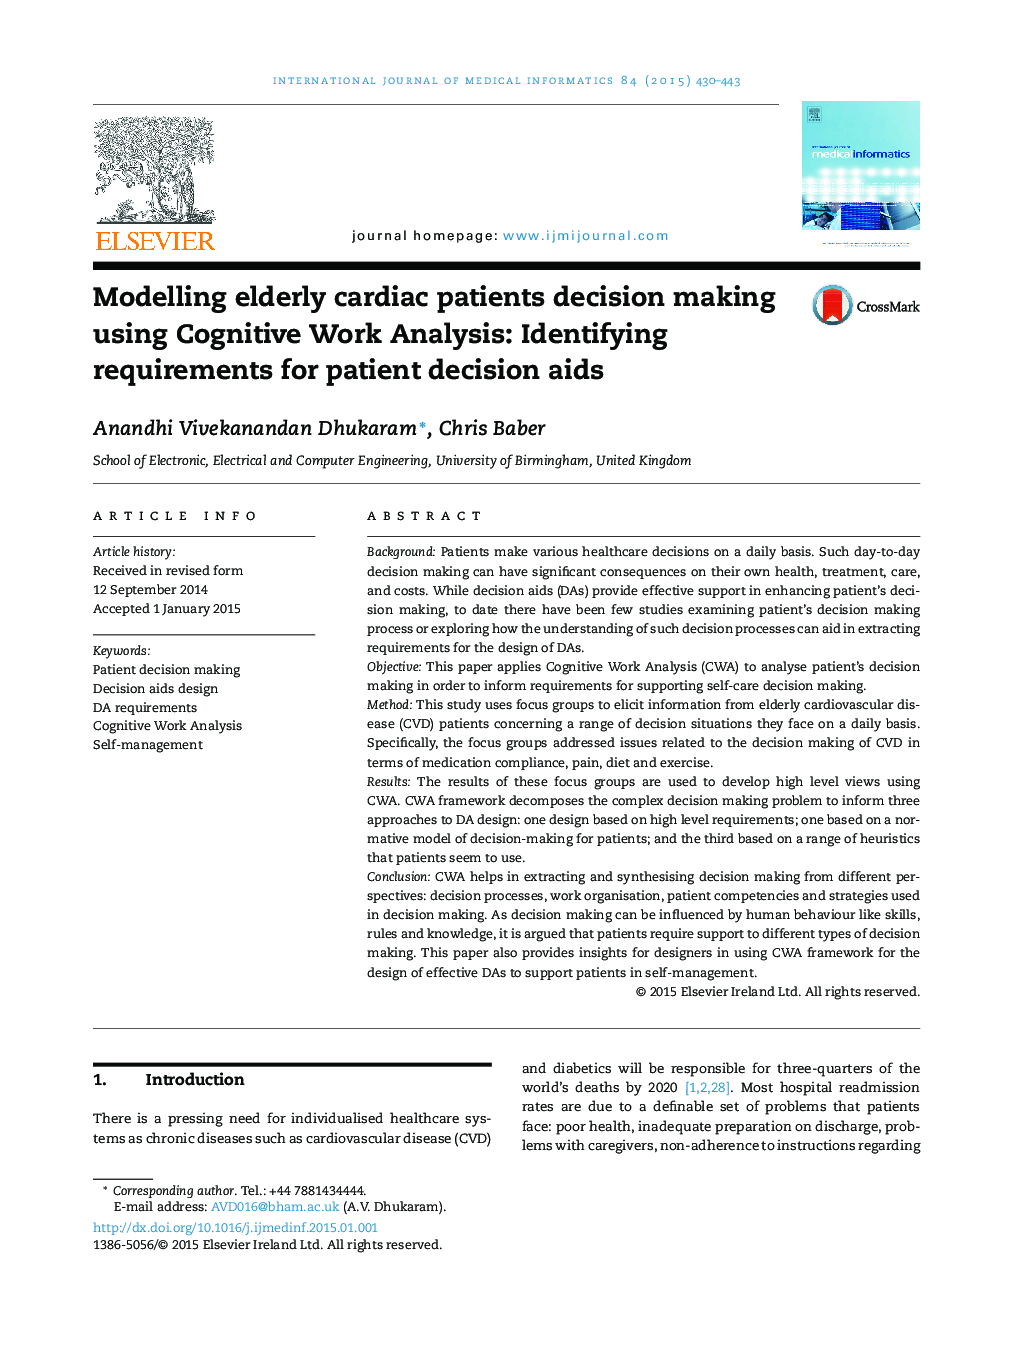 Modelling elderly cardiac patients decision making using Cognitive Work Analysis: Identifying requirements for patient decision aids